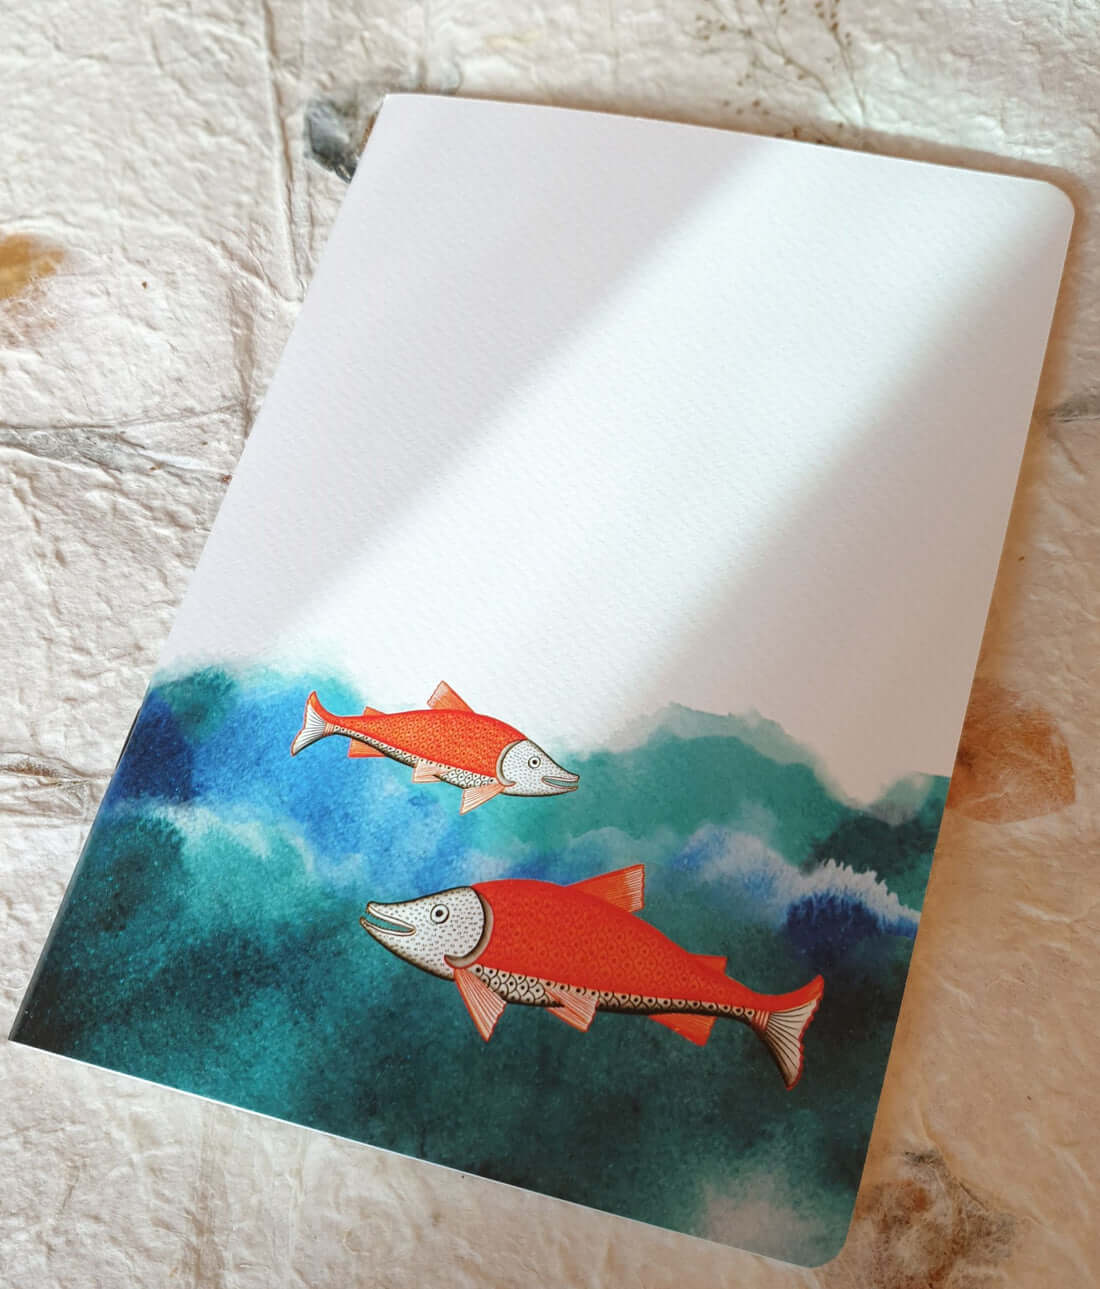 Set of 6 Notebooks. Hammerhead Shark in Patchitra handcrafted Notebook, to raise awareness of marine environment